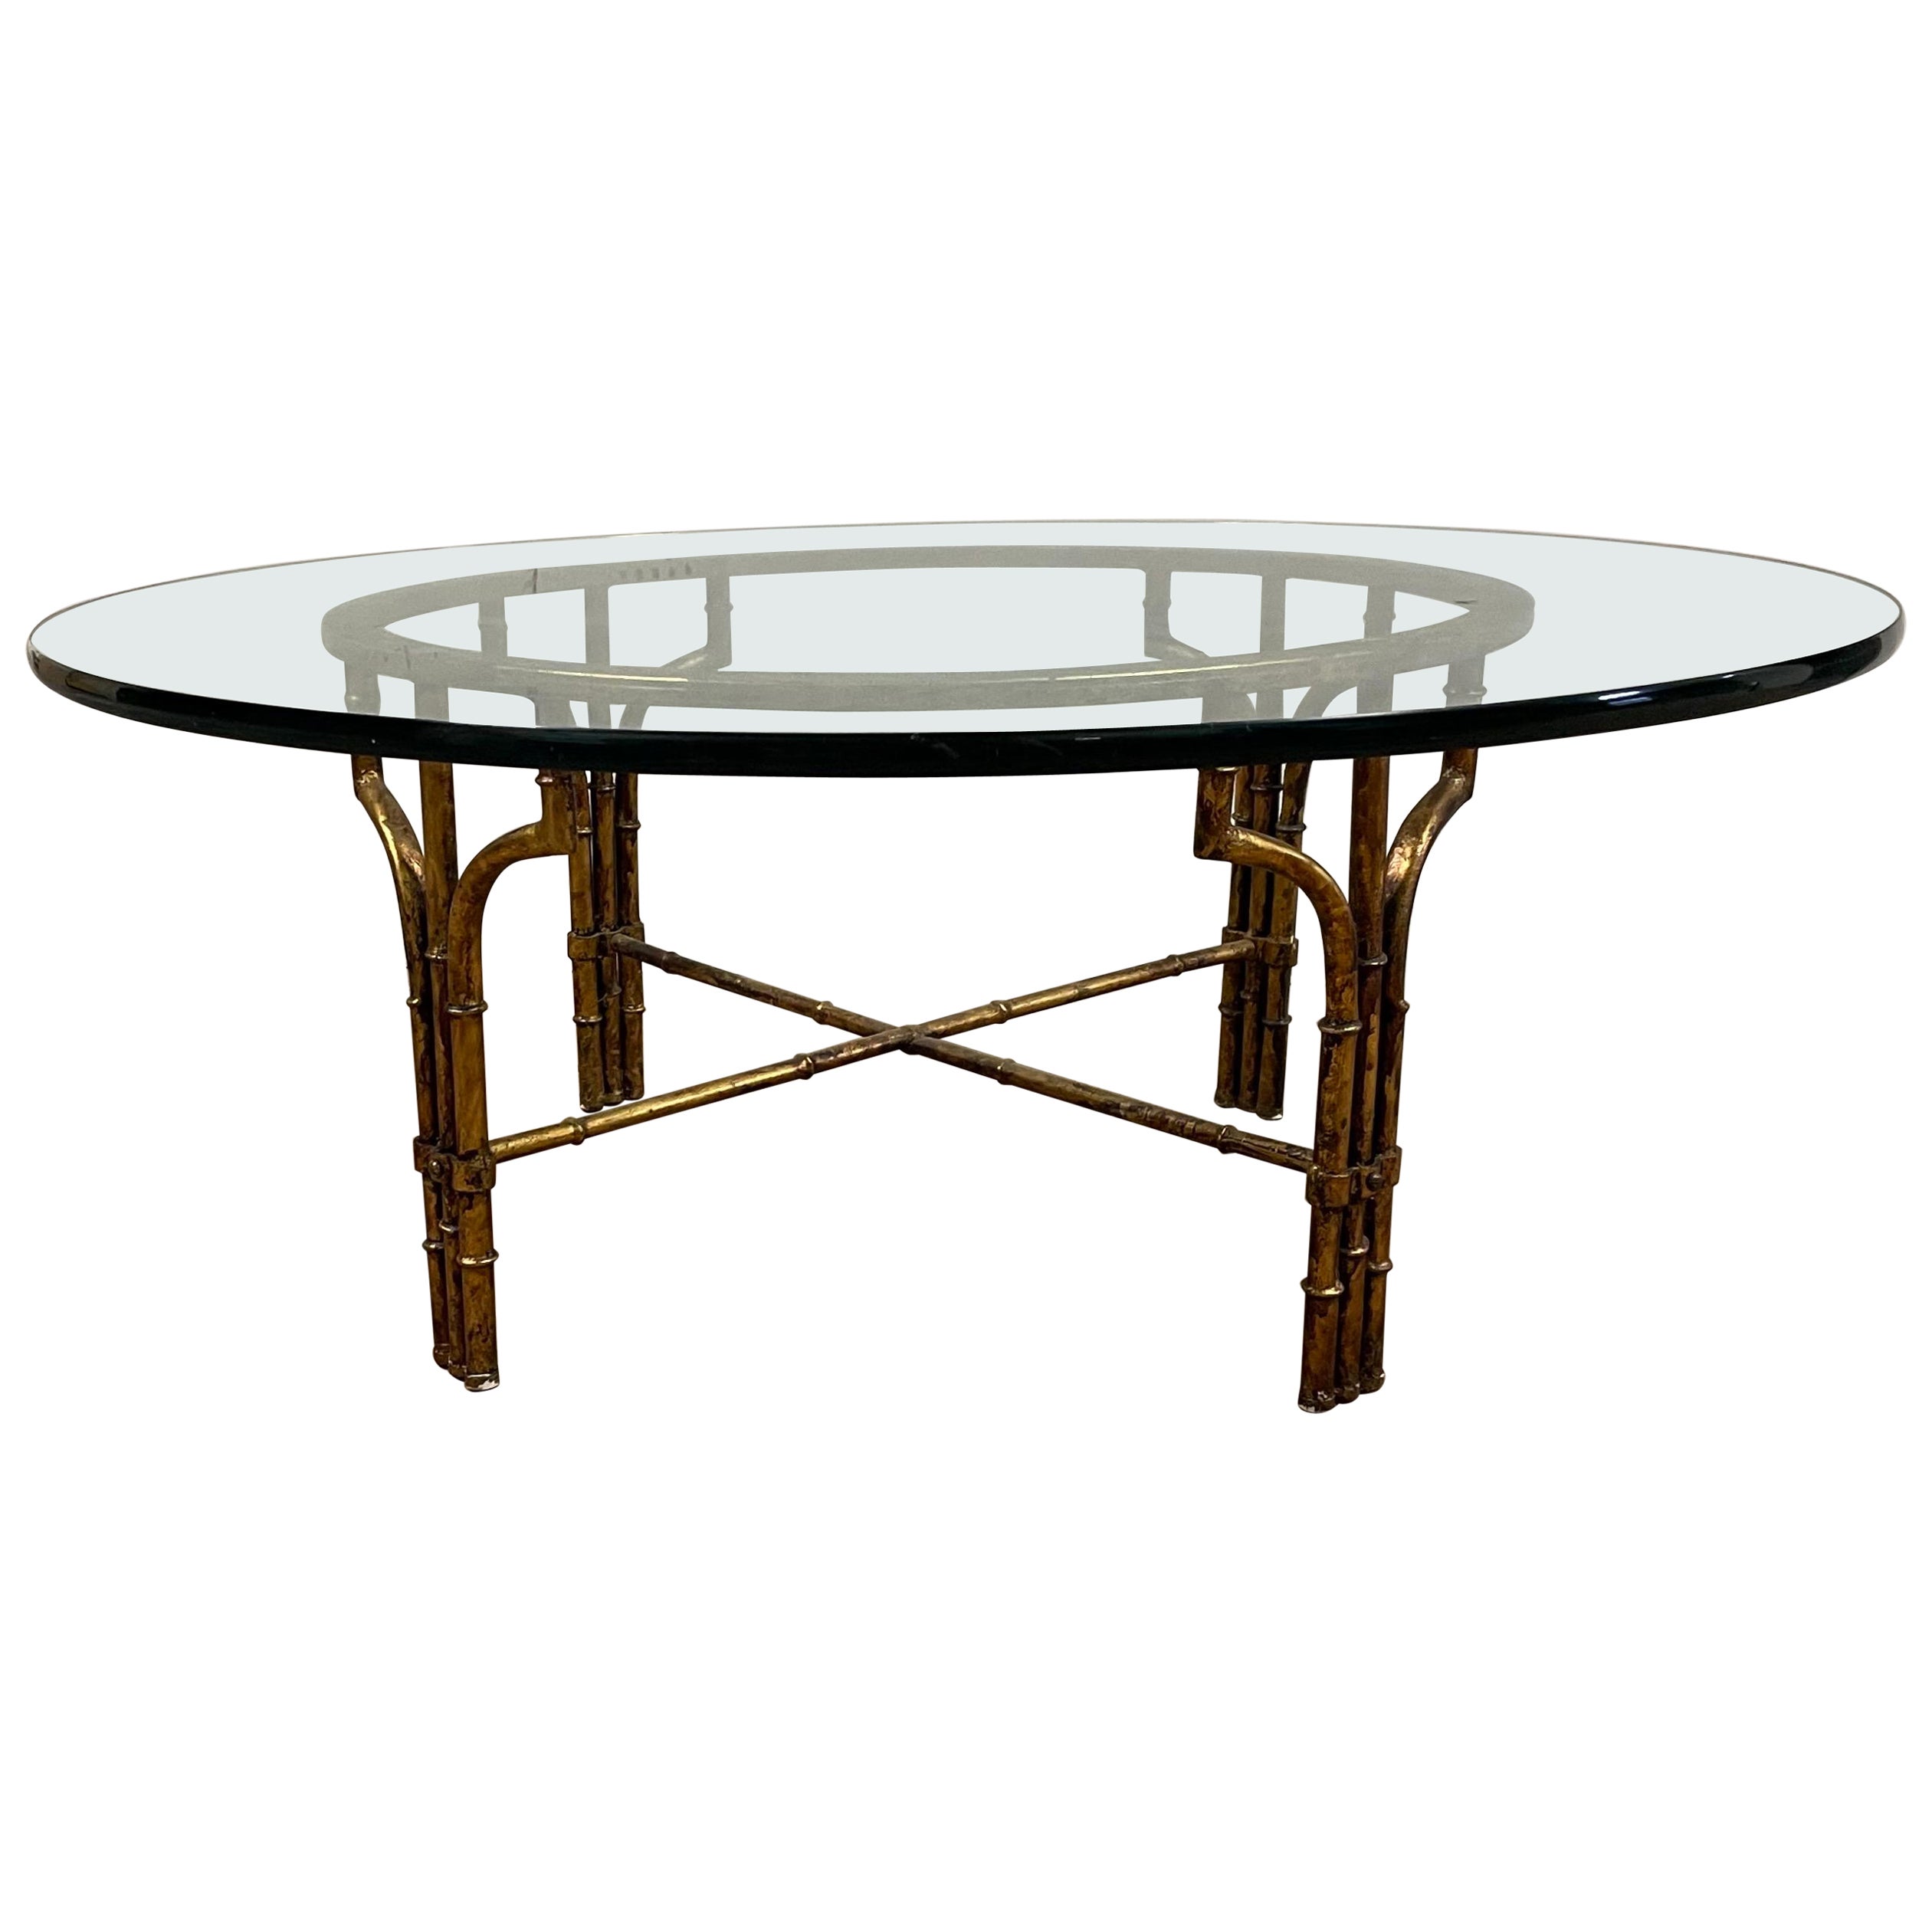 Italian Hollywood Regency Gold Gilt Faux Bamboo & Glass Round Cocktail Table